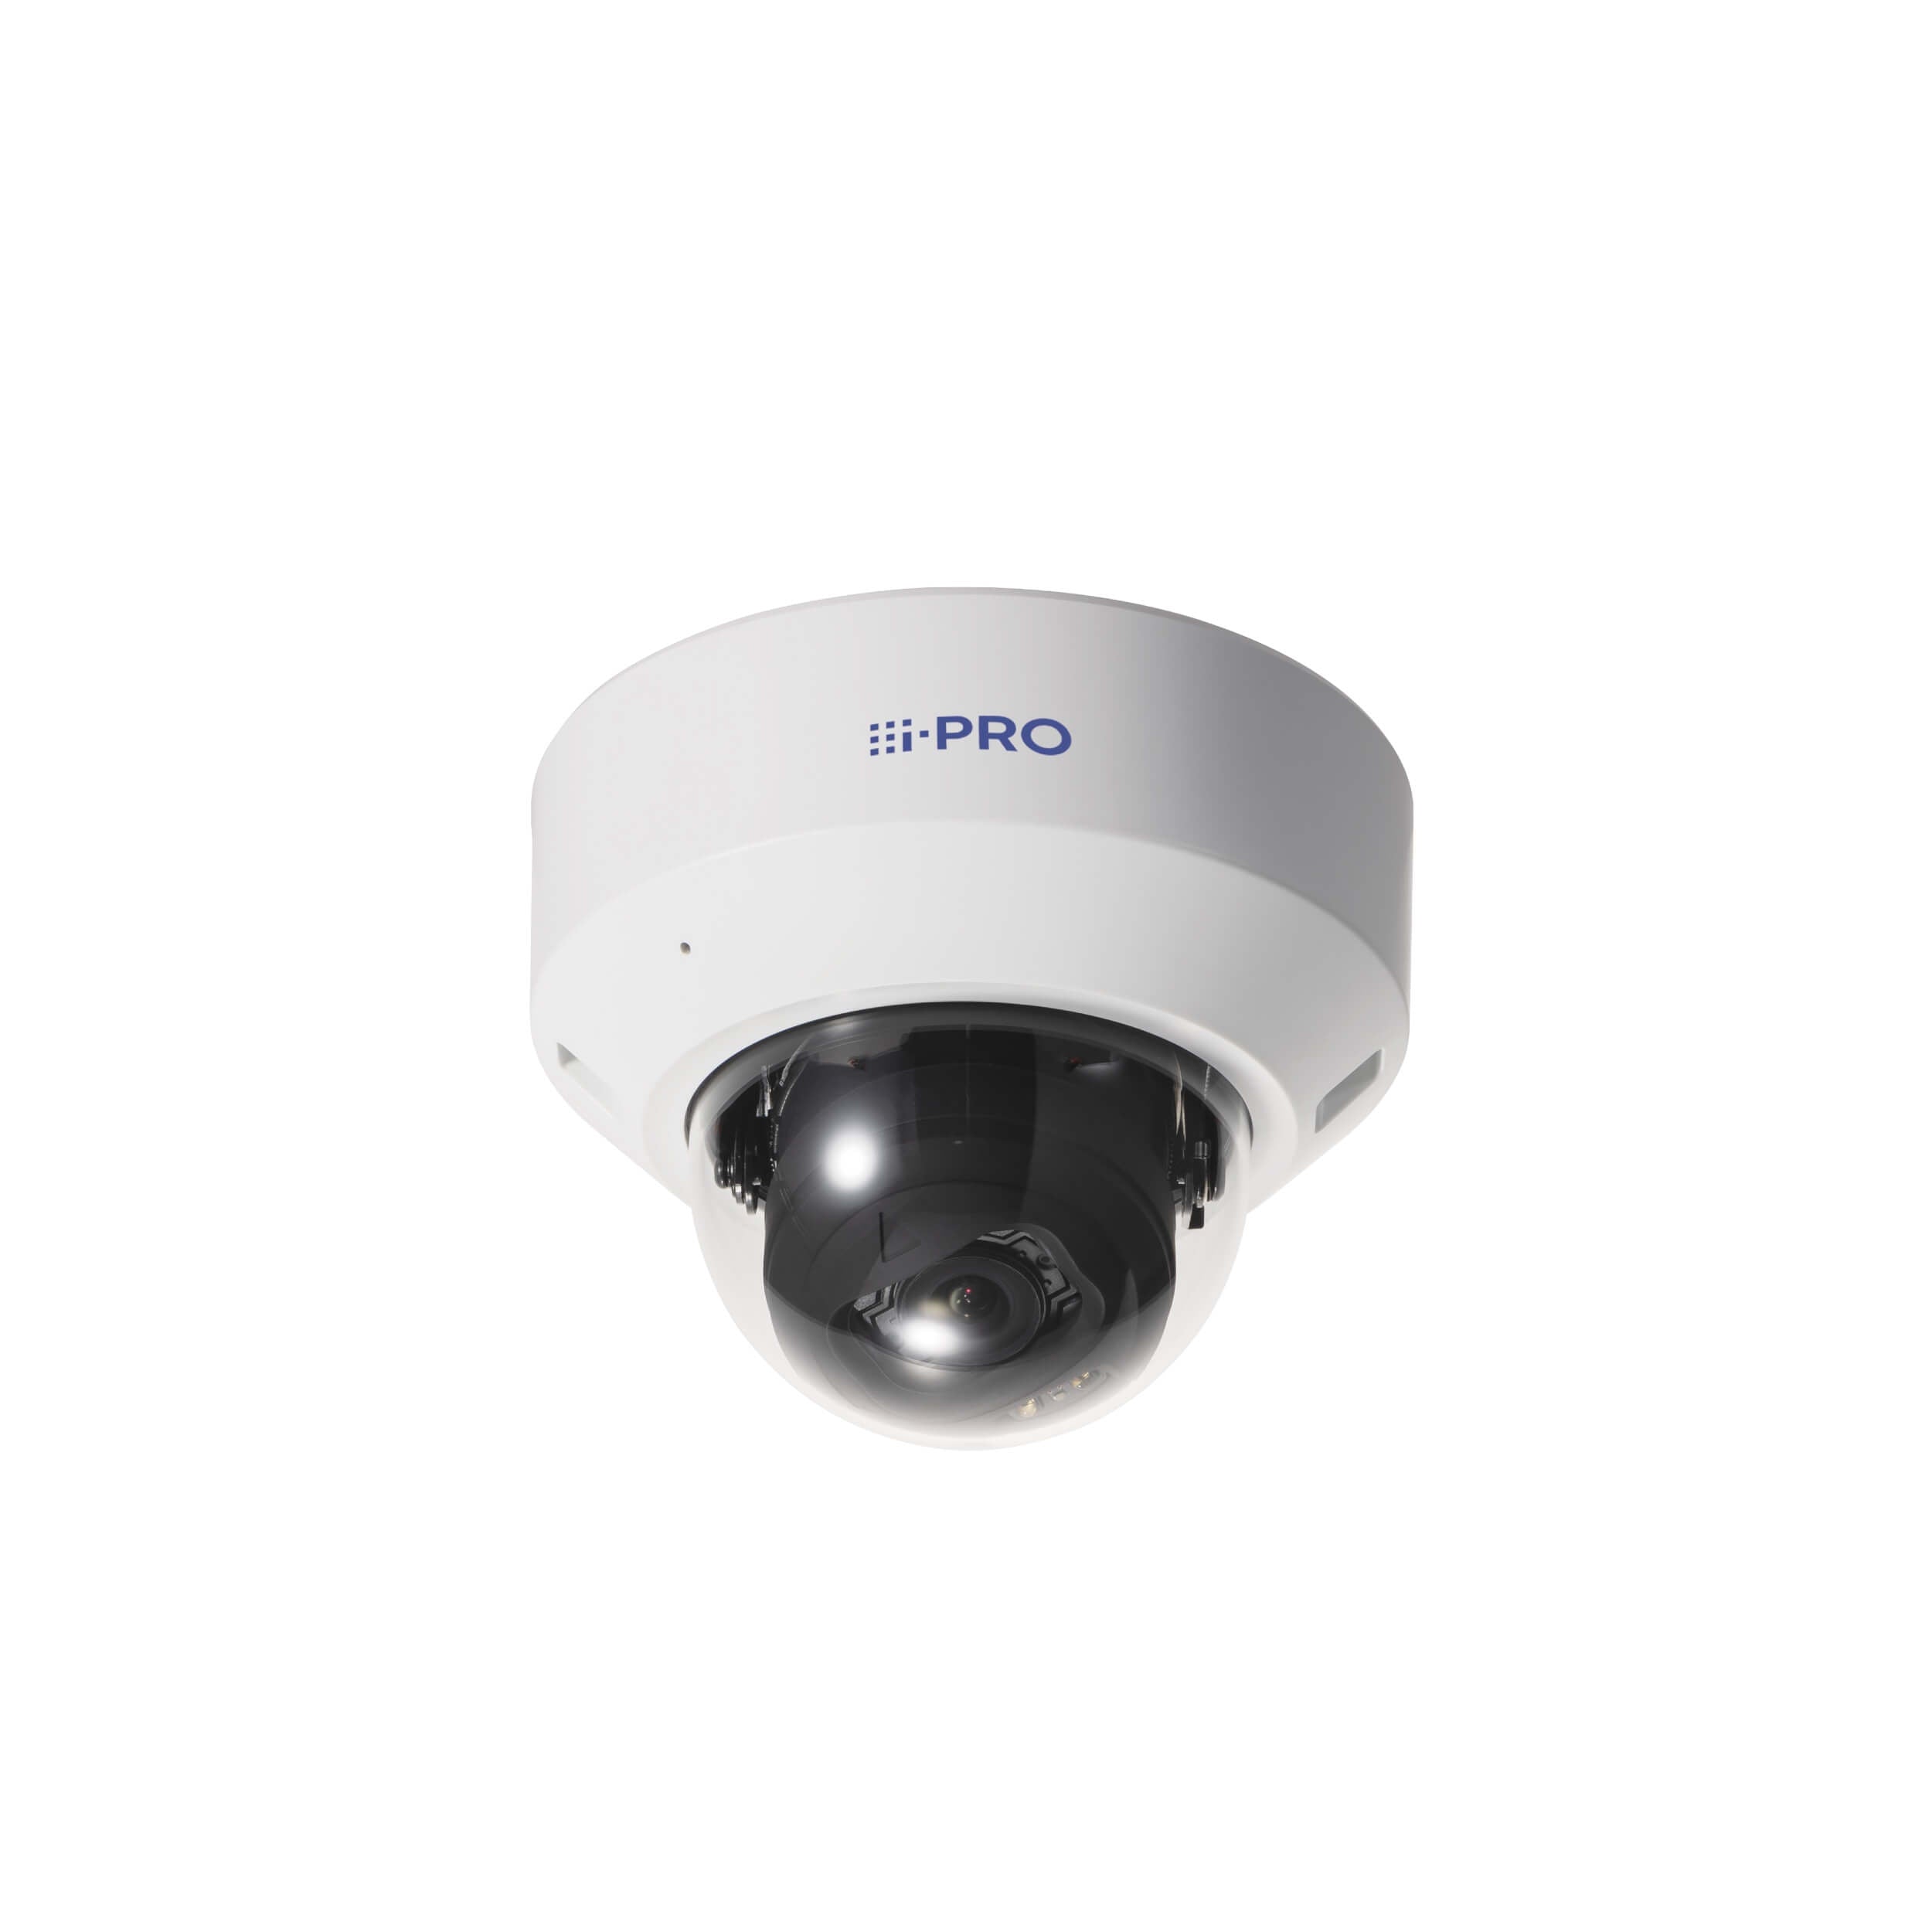 Panasonic WV-S22500-F3L 5MP Vandal Resistant Indoor Dome Network Camera with AI Engine with 3.2mm Lens